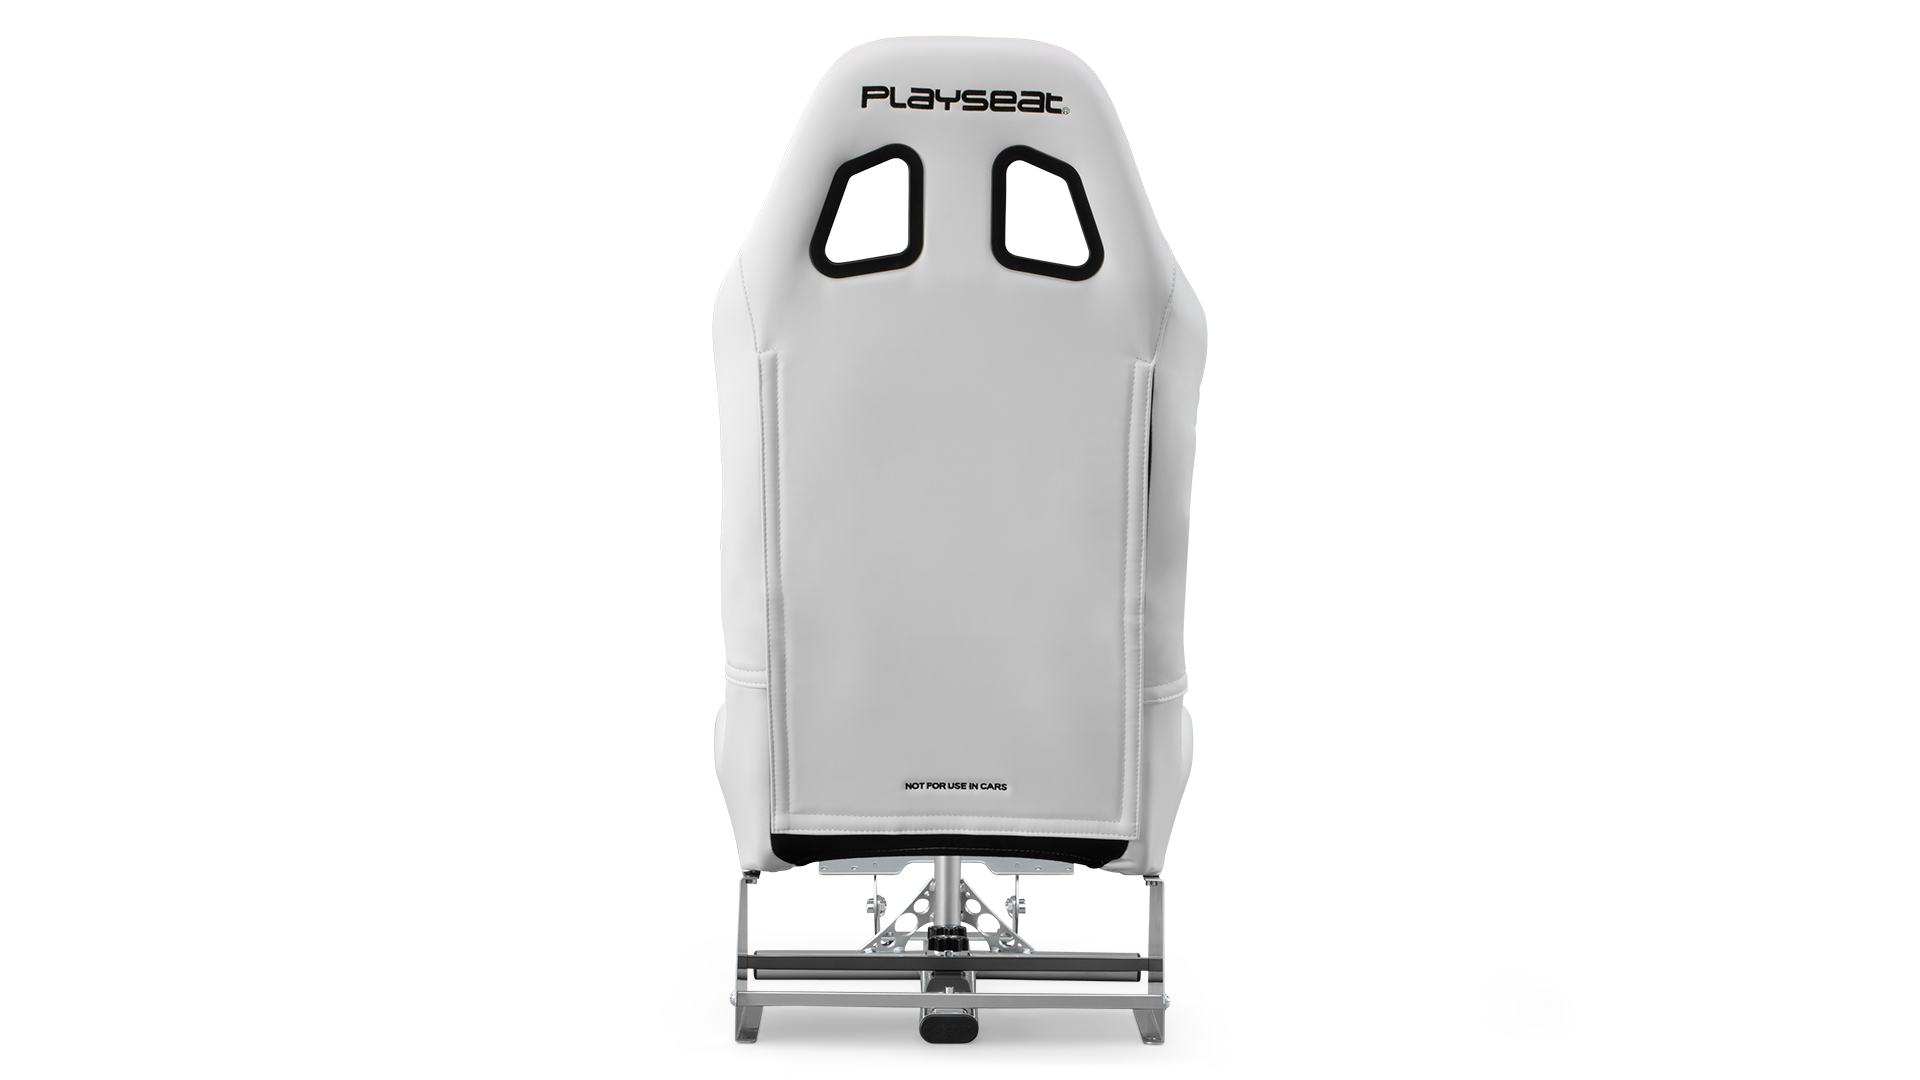 playseat-evolution-white-racing-simulator-back-view-1920x1080-3.png